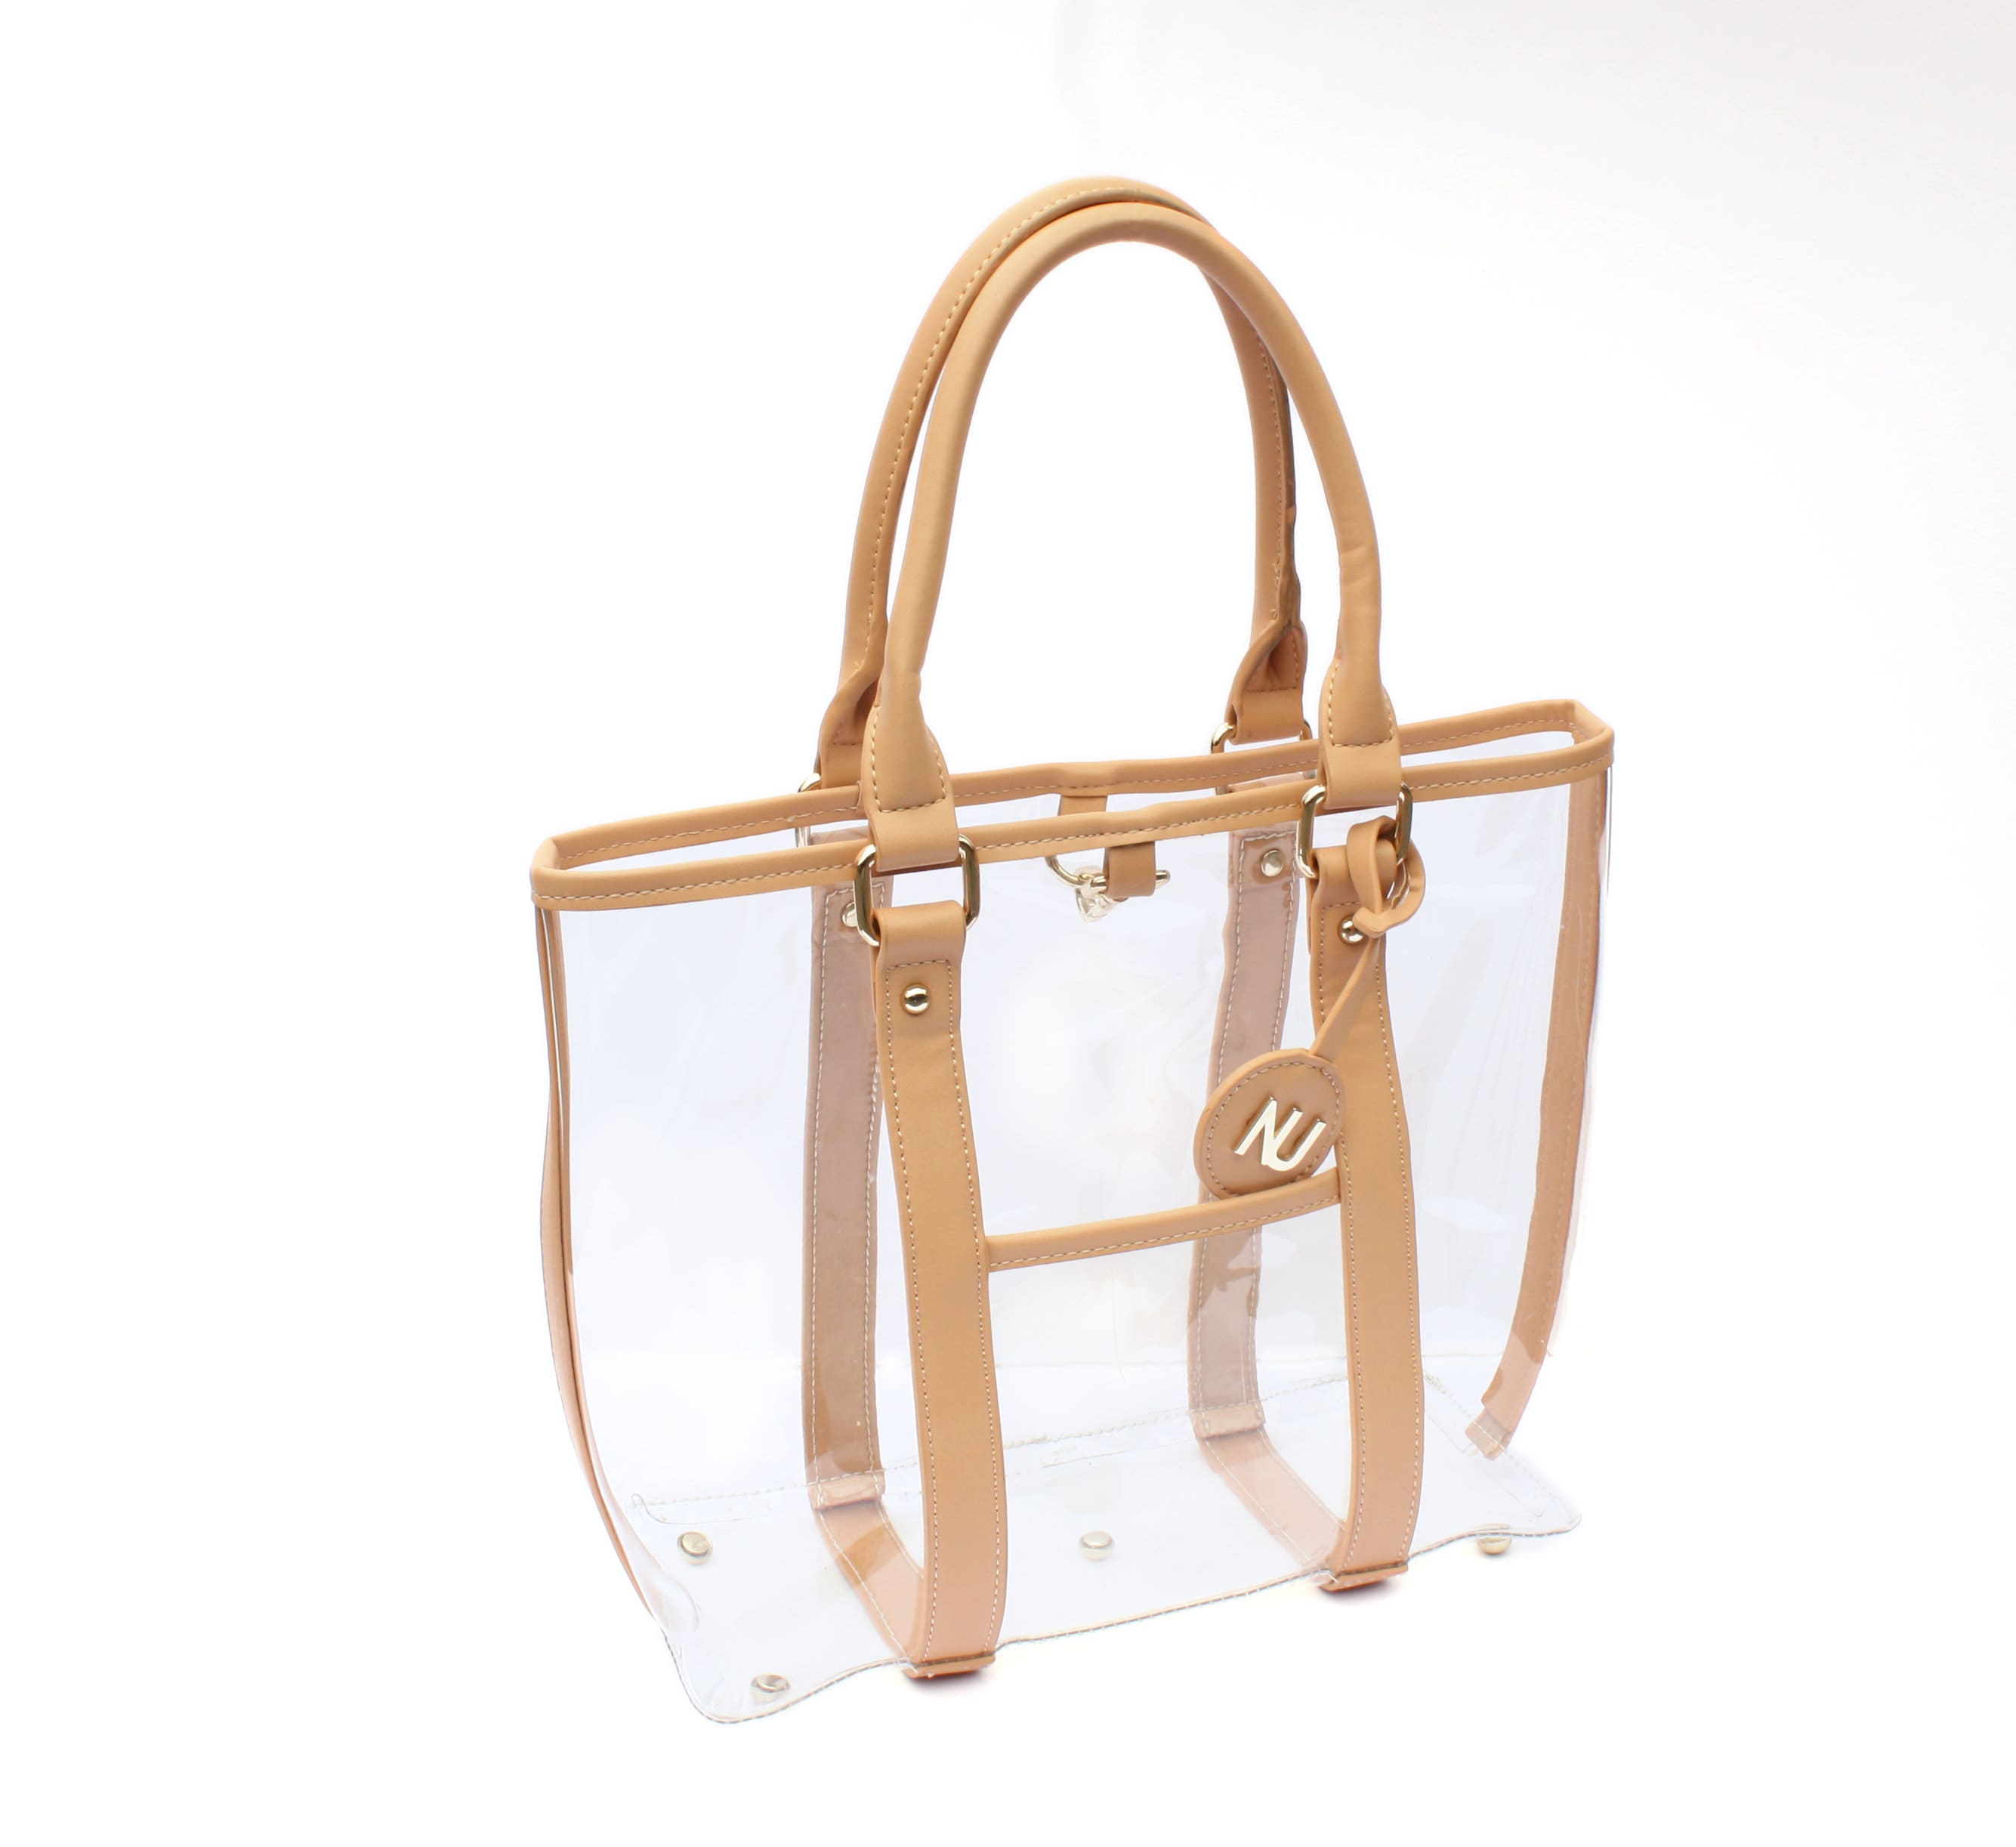 Clear Handbags - Funky, Fashionable and Full of Style! - AllDayChic